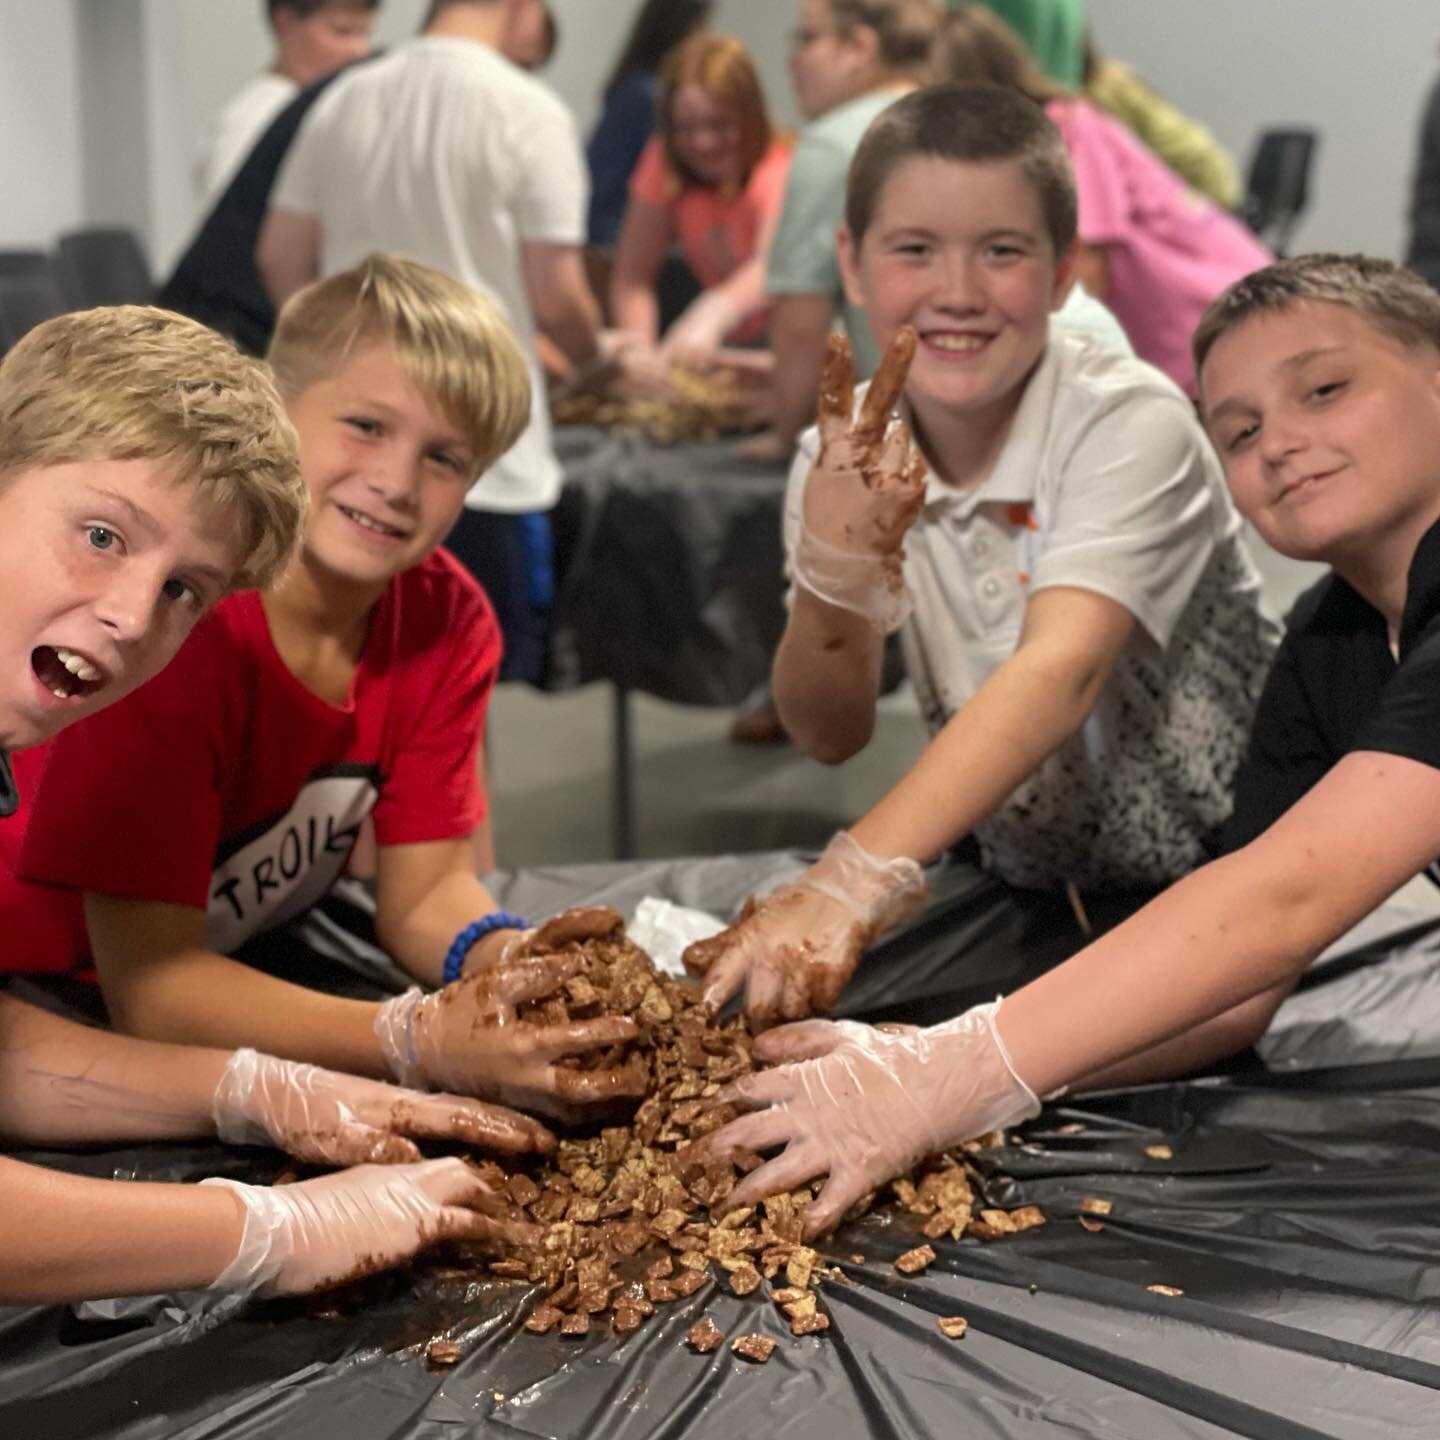 We made puppy chow last night at groups! Pretty sure the pictures say it all! We had a great time! Next Sunday we will be taking a field trip to do RANDOM ACTS OF KINDNESS all over town! Who&rsquo;s coming? #FLFStudentGroups